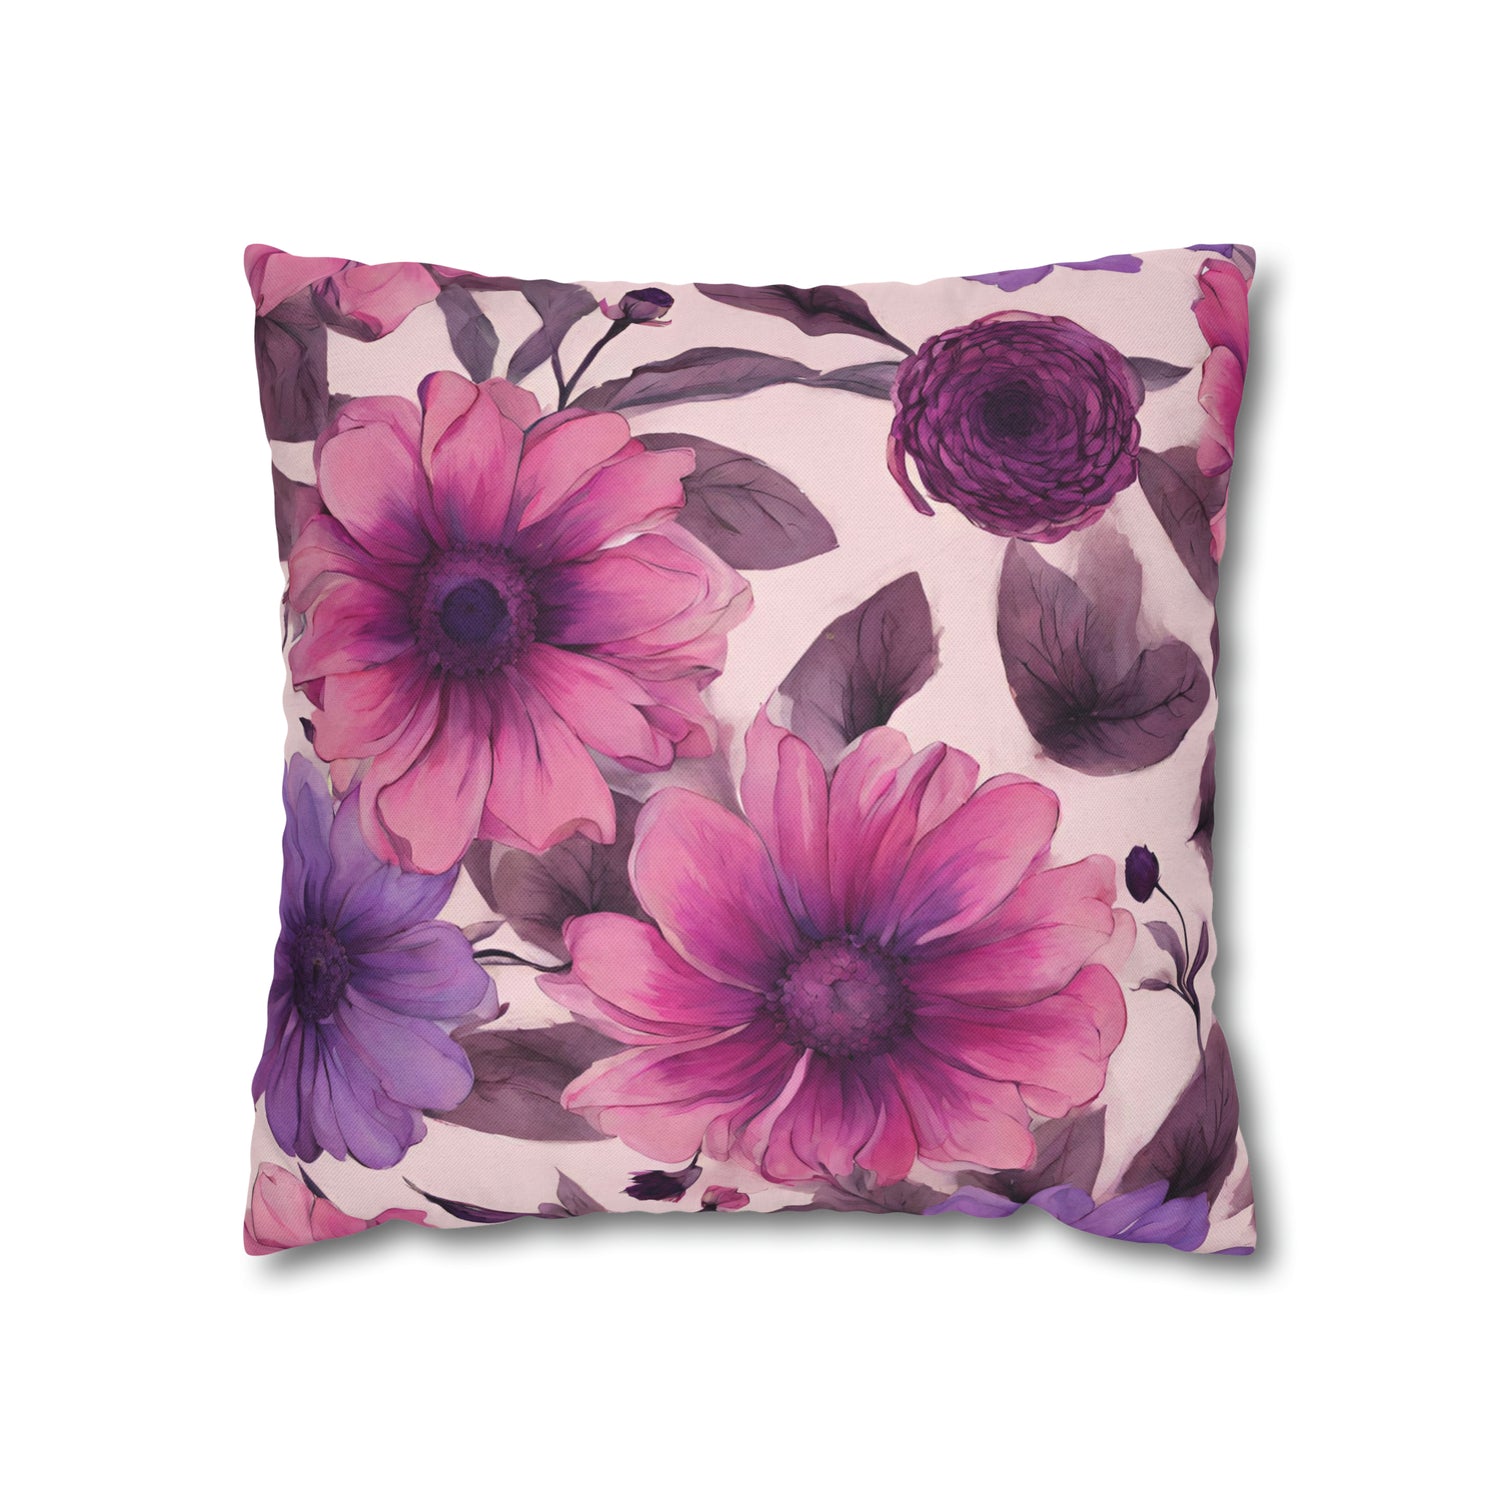 THROW PILLOW COVERS